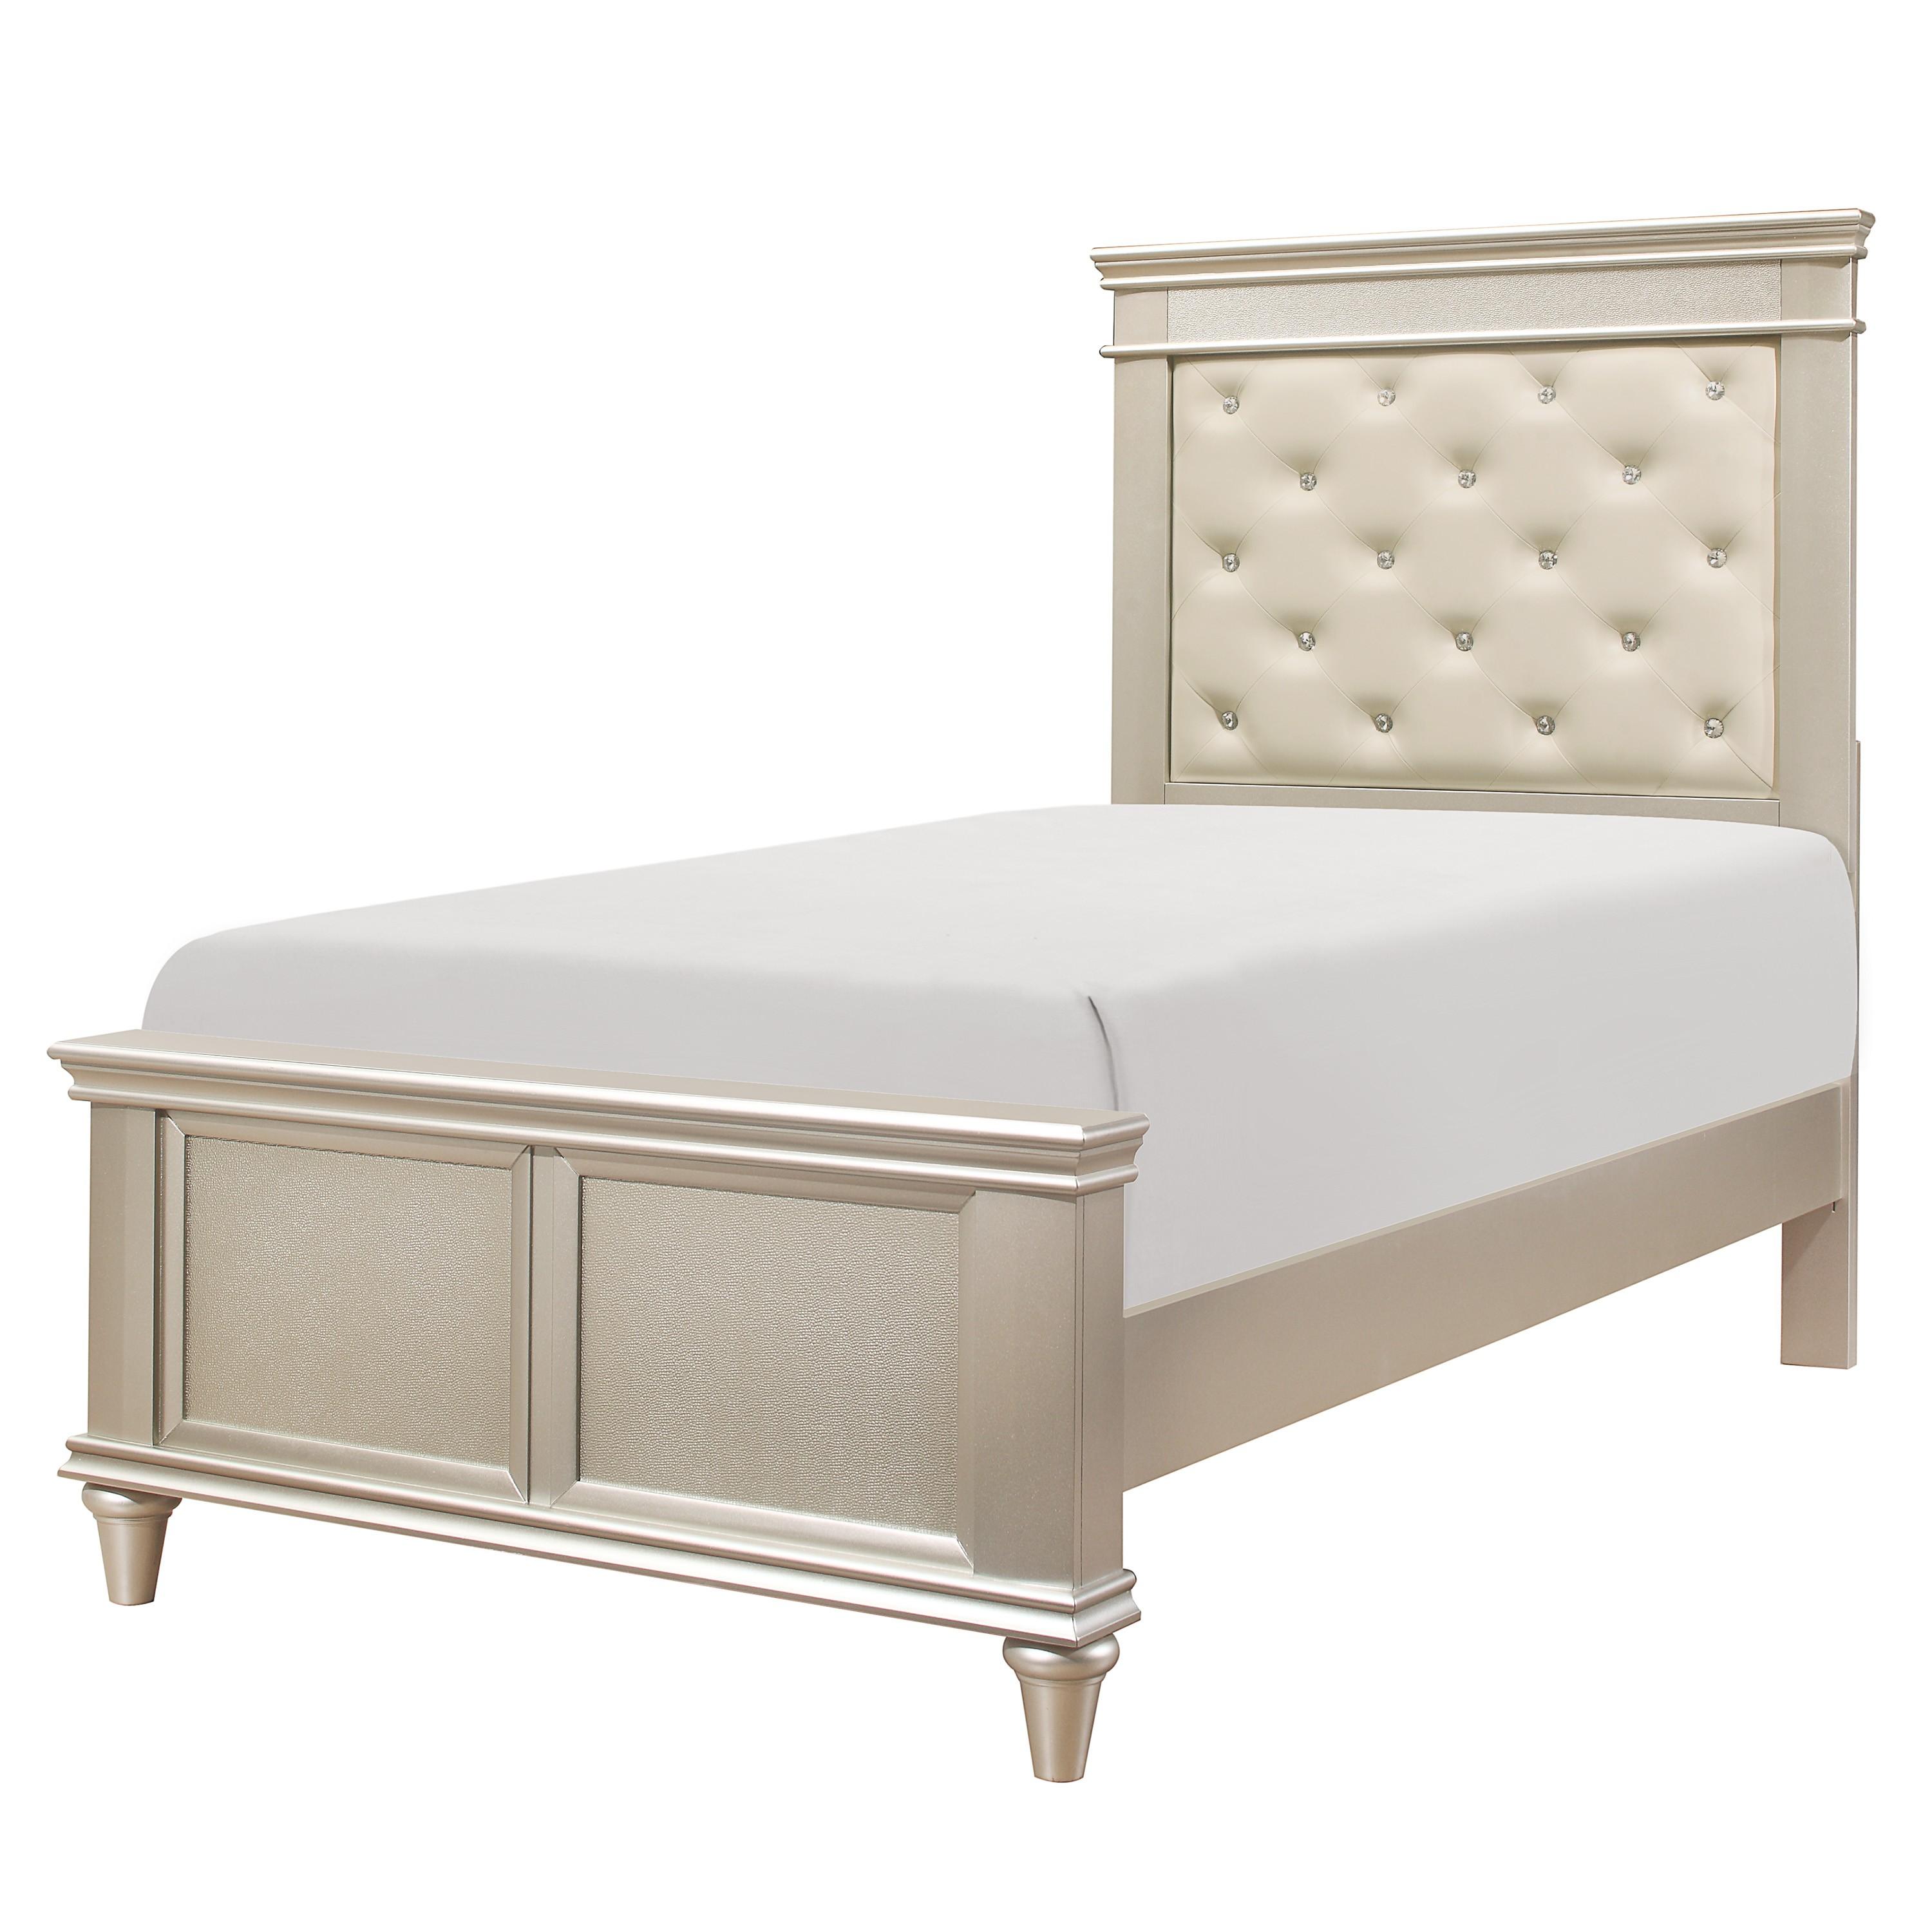 Traditional Bed 1928T-1* Celandine 1928T-1* in Off-White, Silver Faux Leather